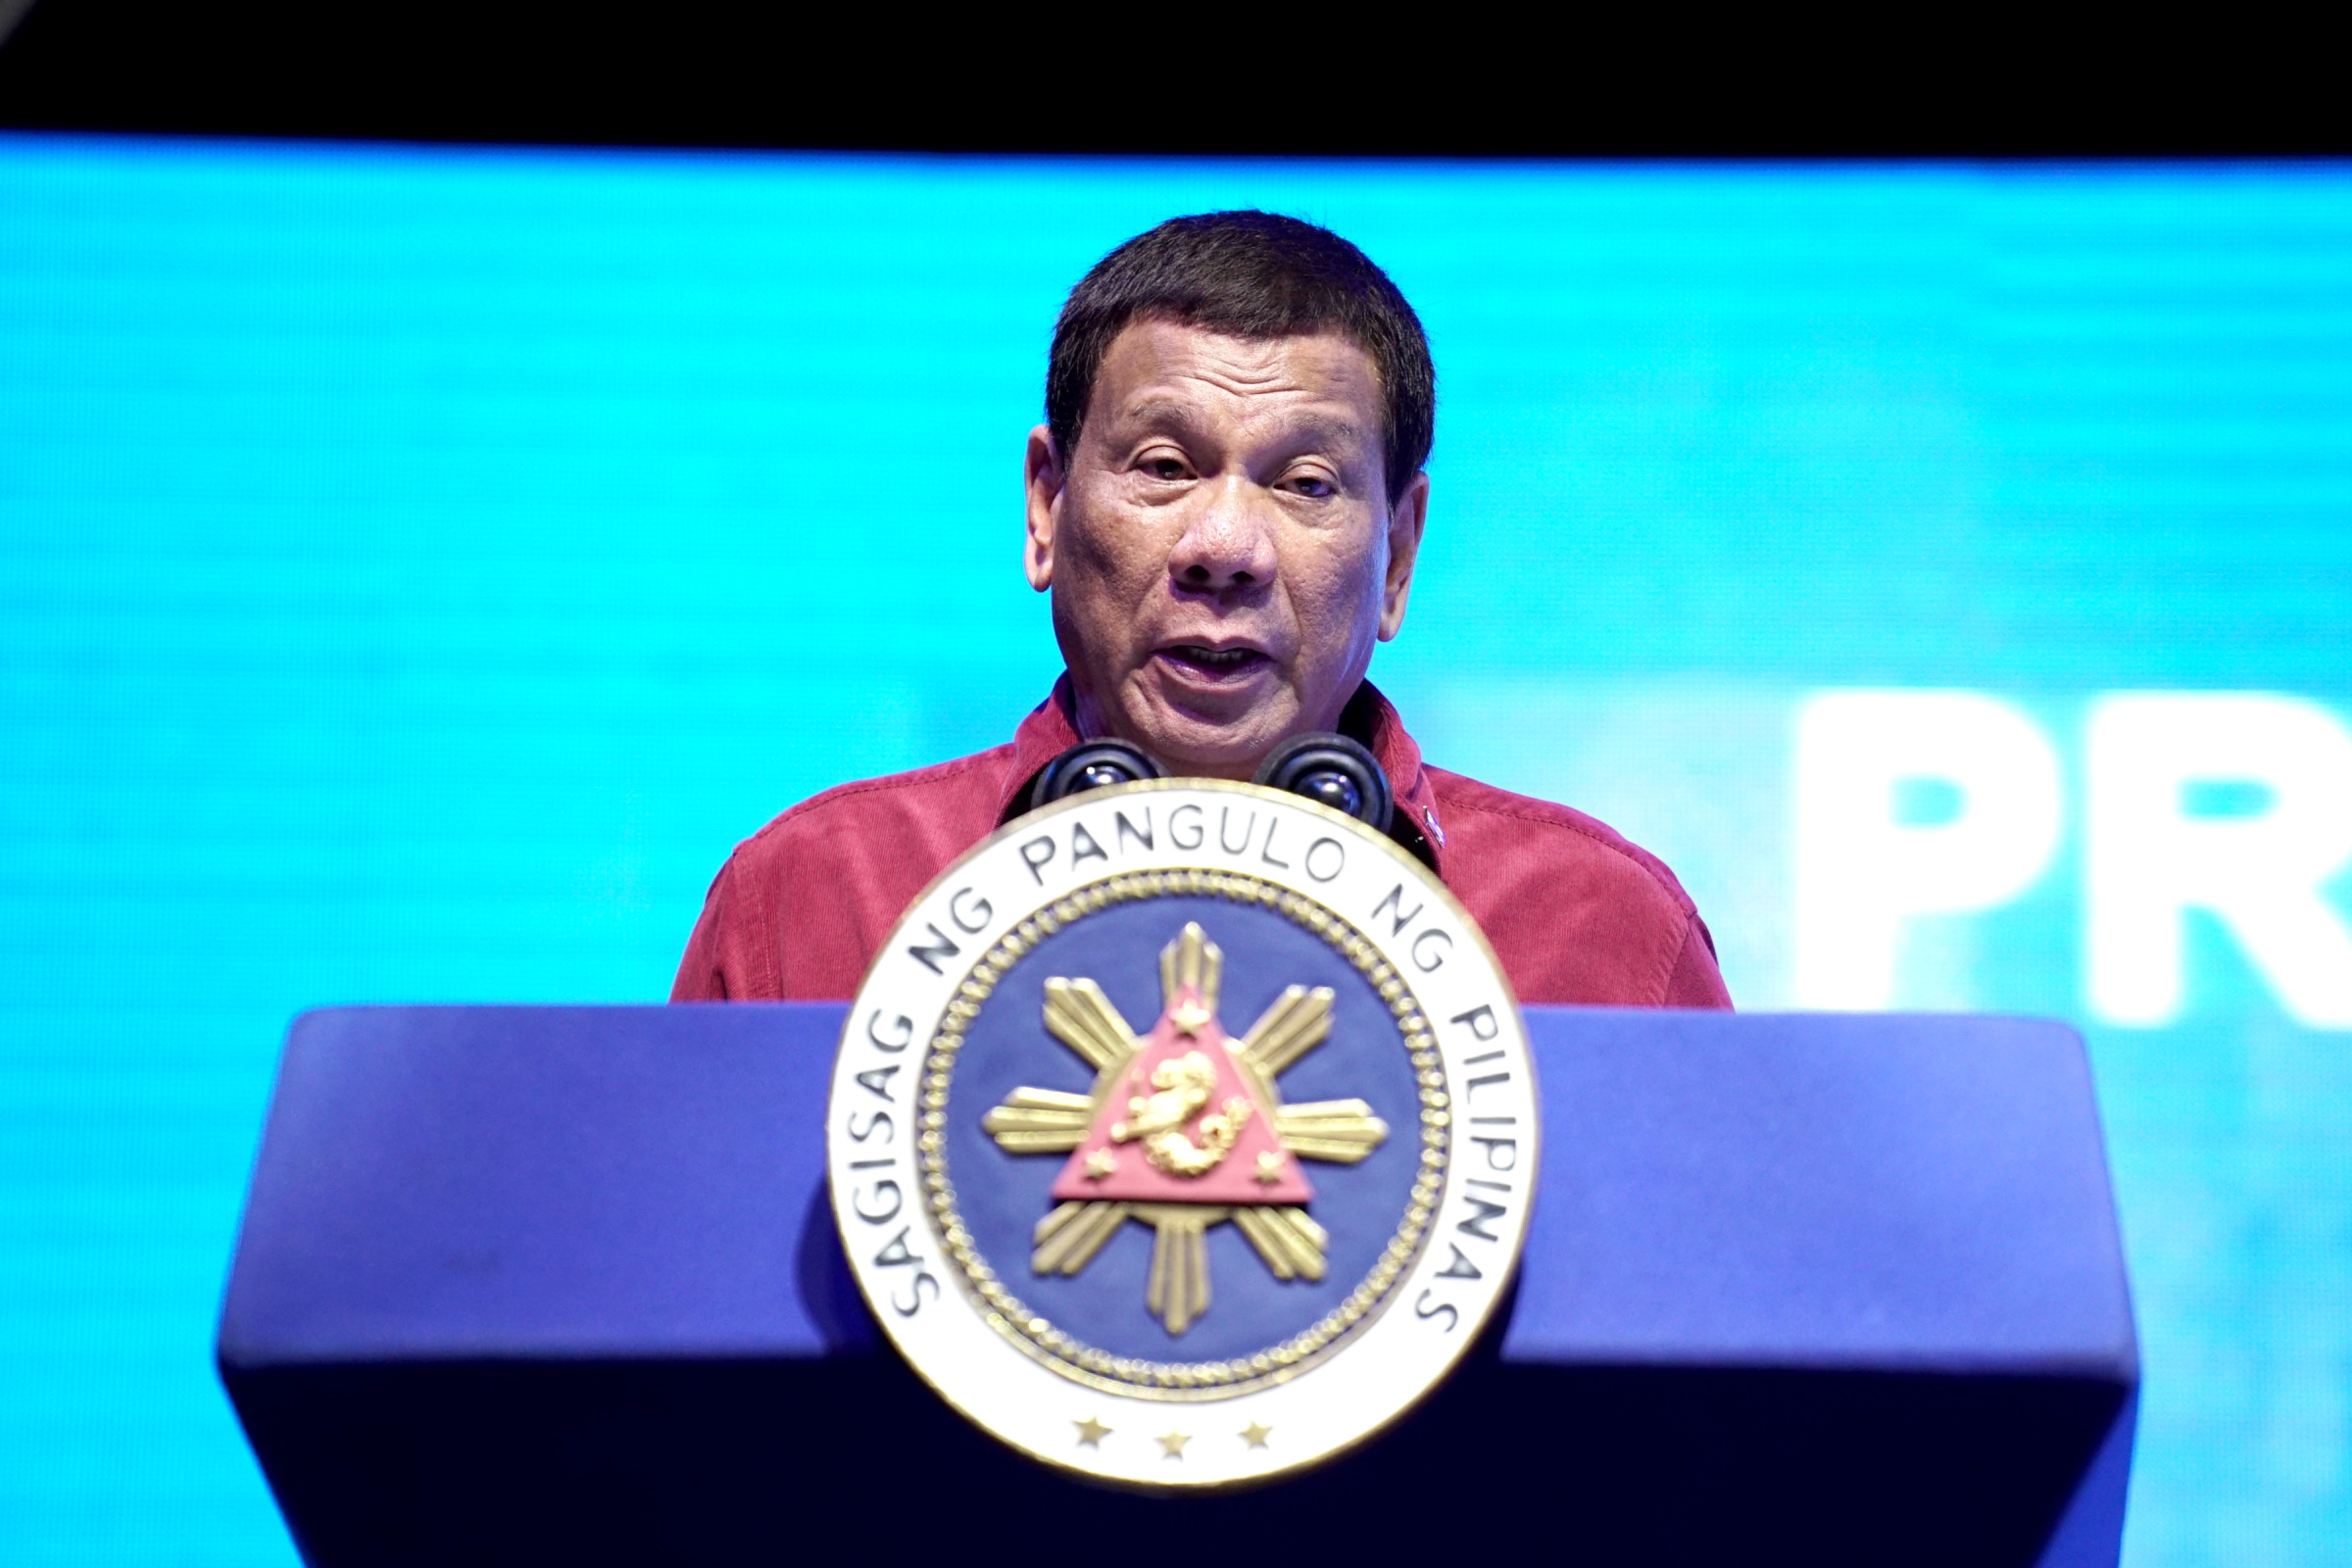 CAMPAIGN RALLY. President Rodrigo Roa Duterte delivers his speech during the PDP-Laban campaign rally at the Plaza Independencia in Cebu City on February 24, 2019. Malacañang photo 